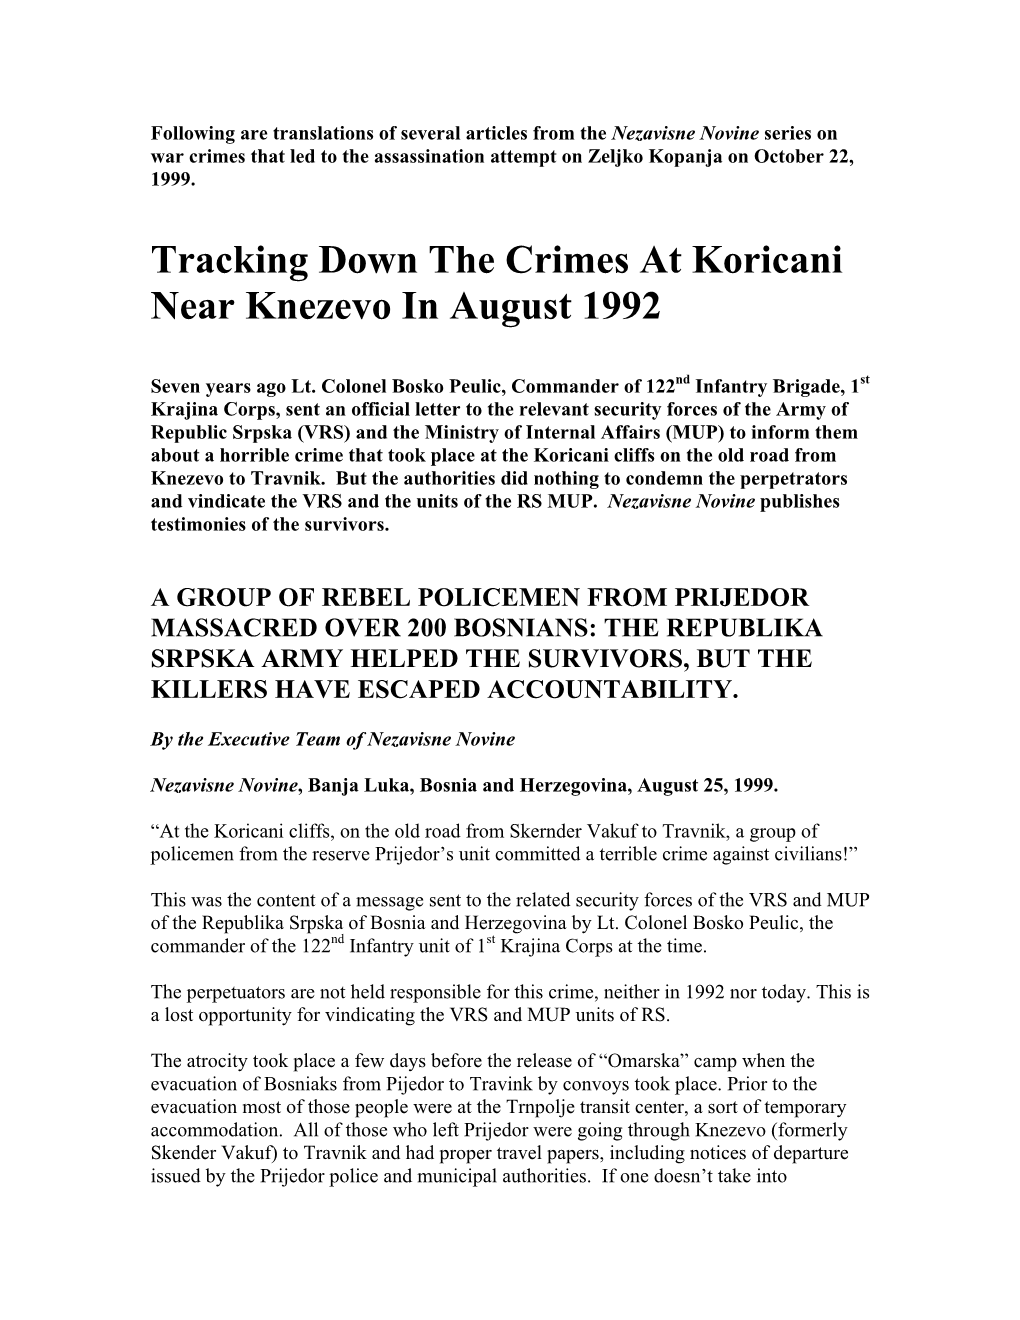 Tracking Down the Crimes at Koricani Near Knezevo in August 1992